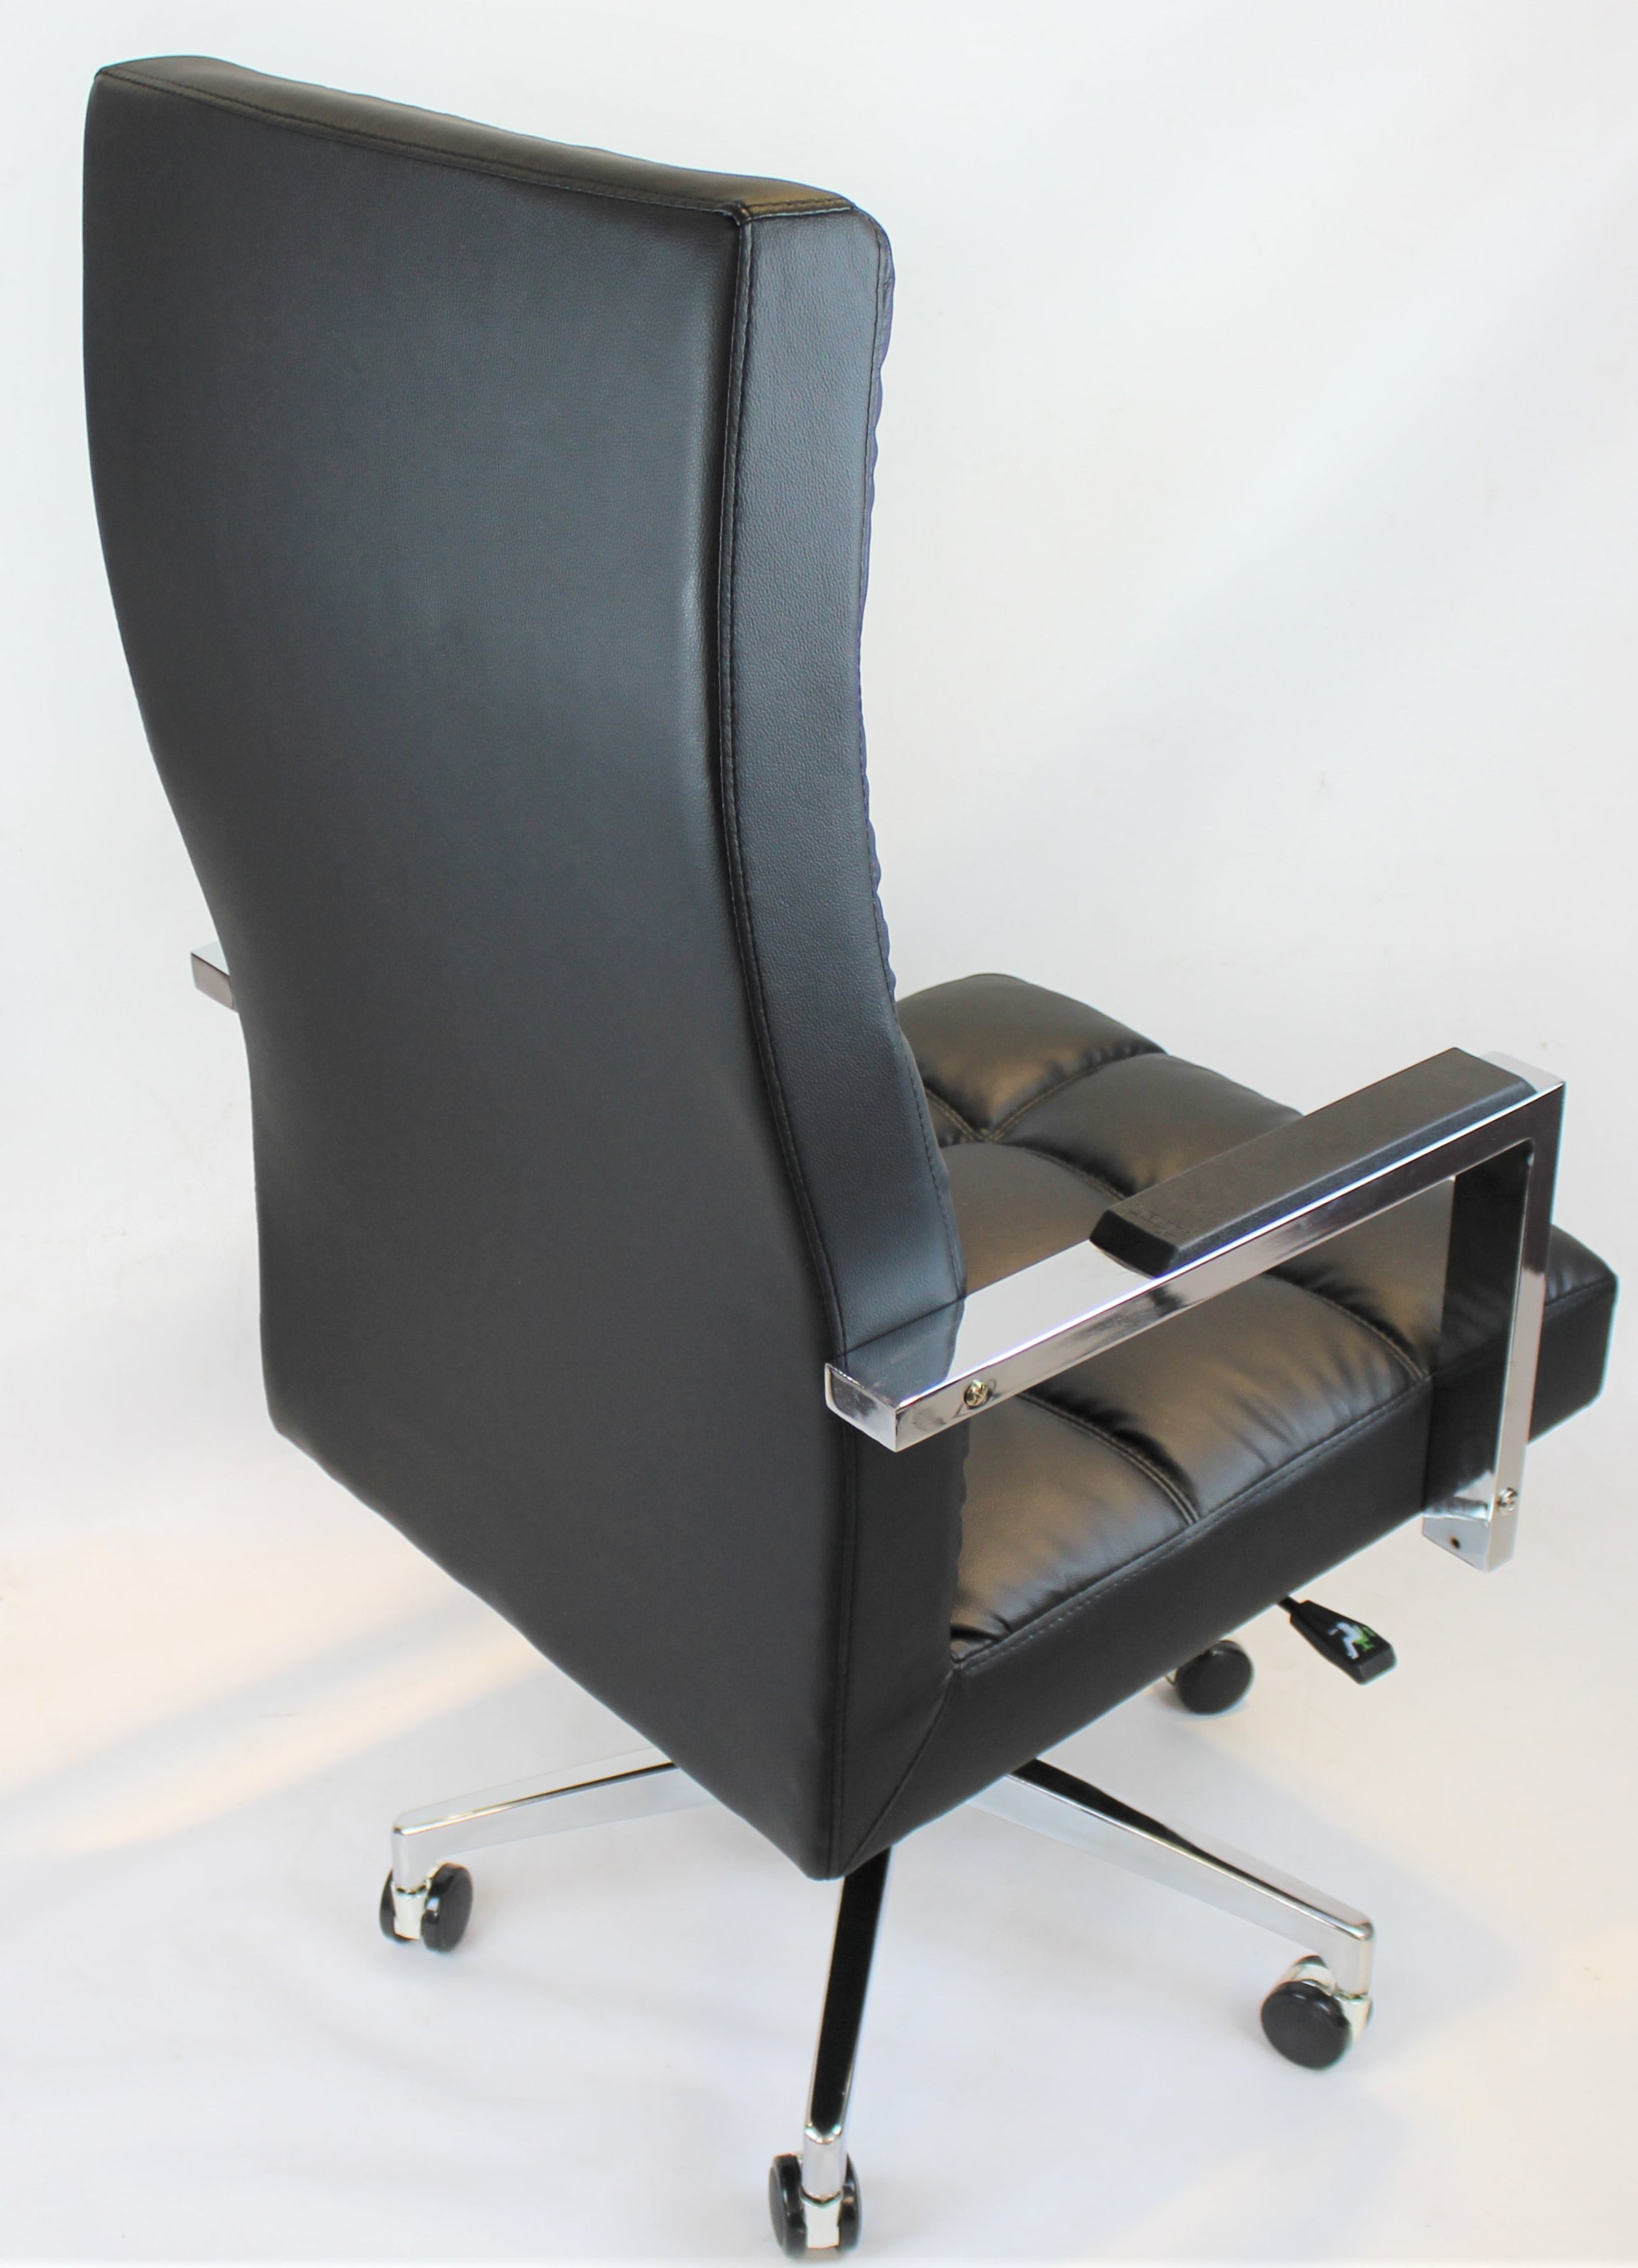 Executive Black Leather Office Chair - ZM-A310